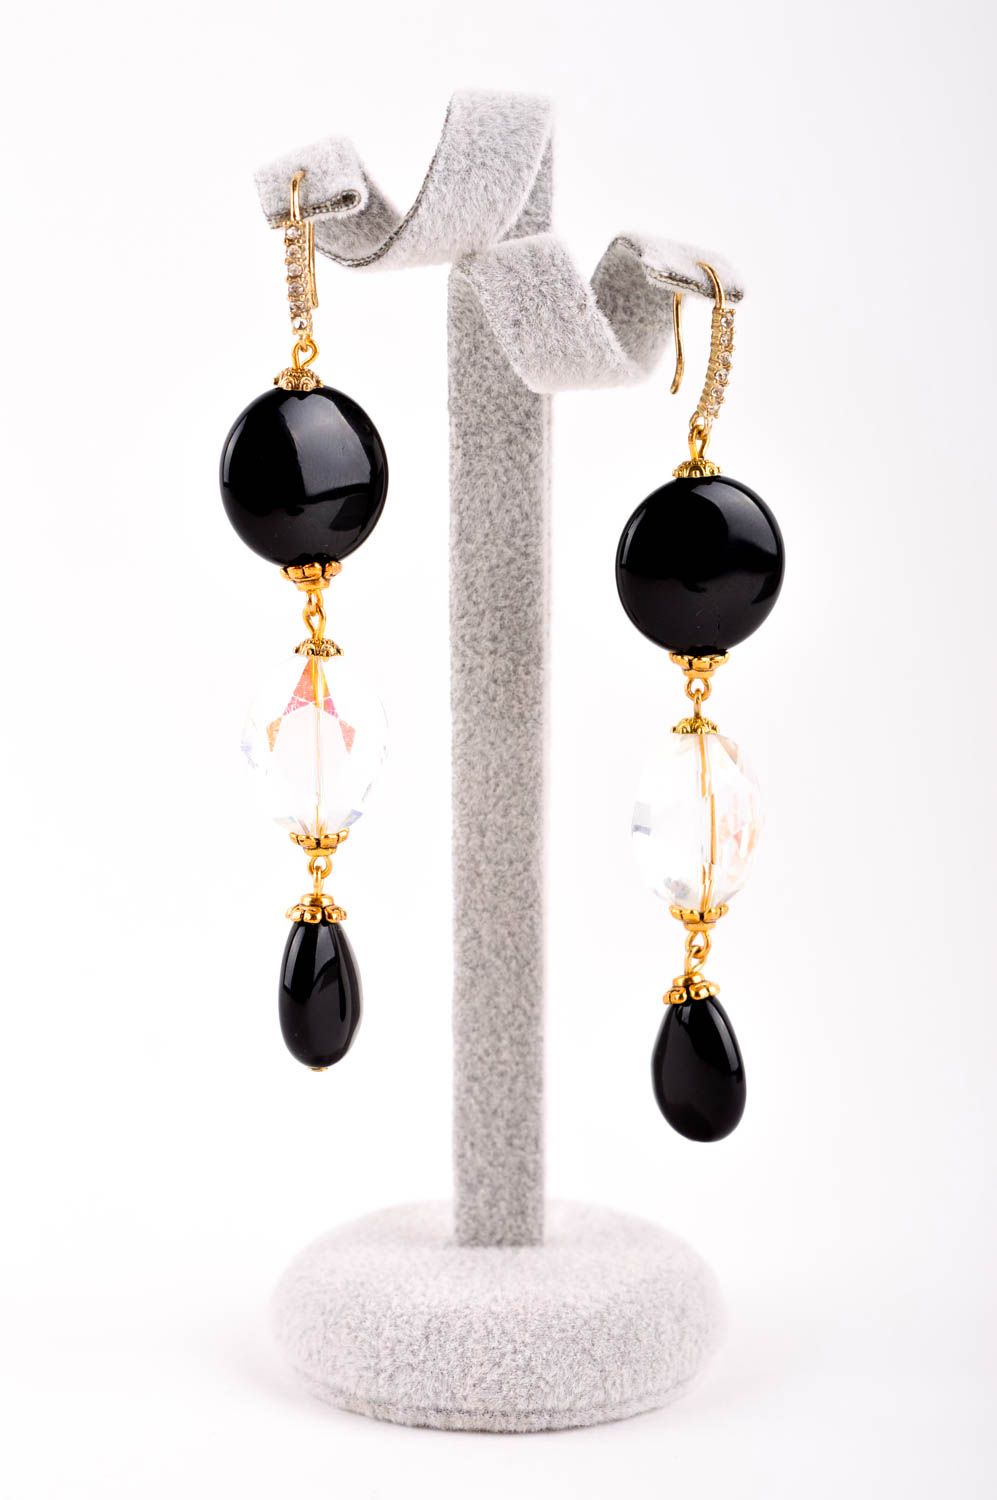 Handmade earrings with charms evening jewelry with natural stones for women photo 2